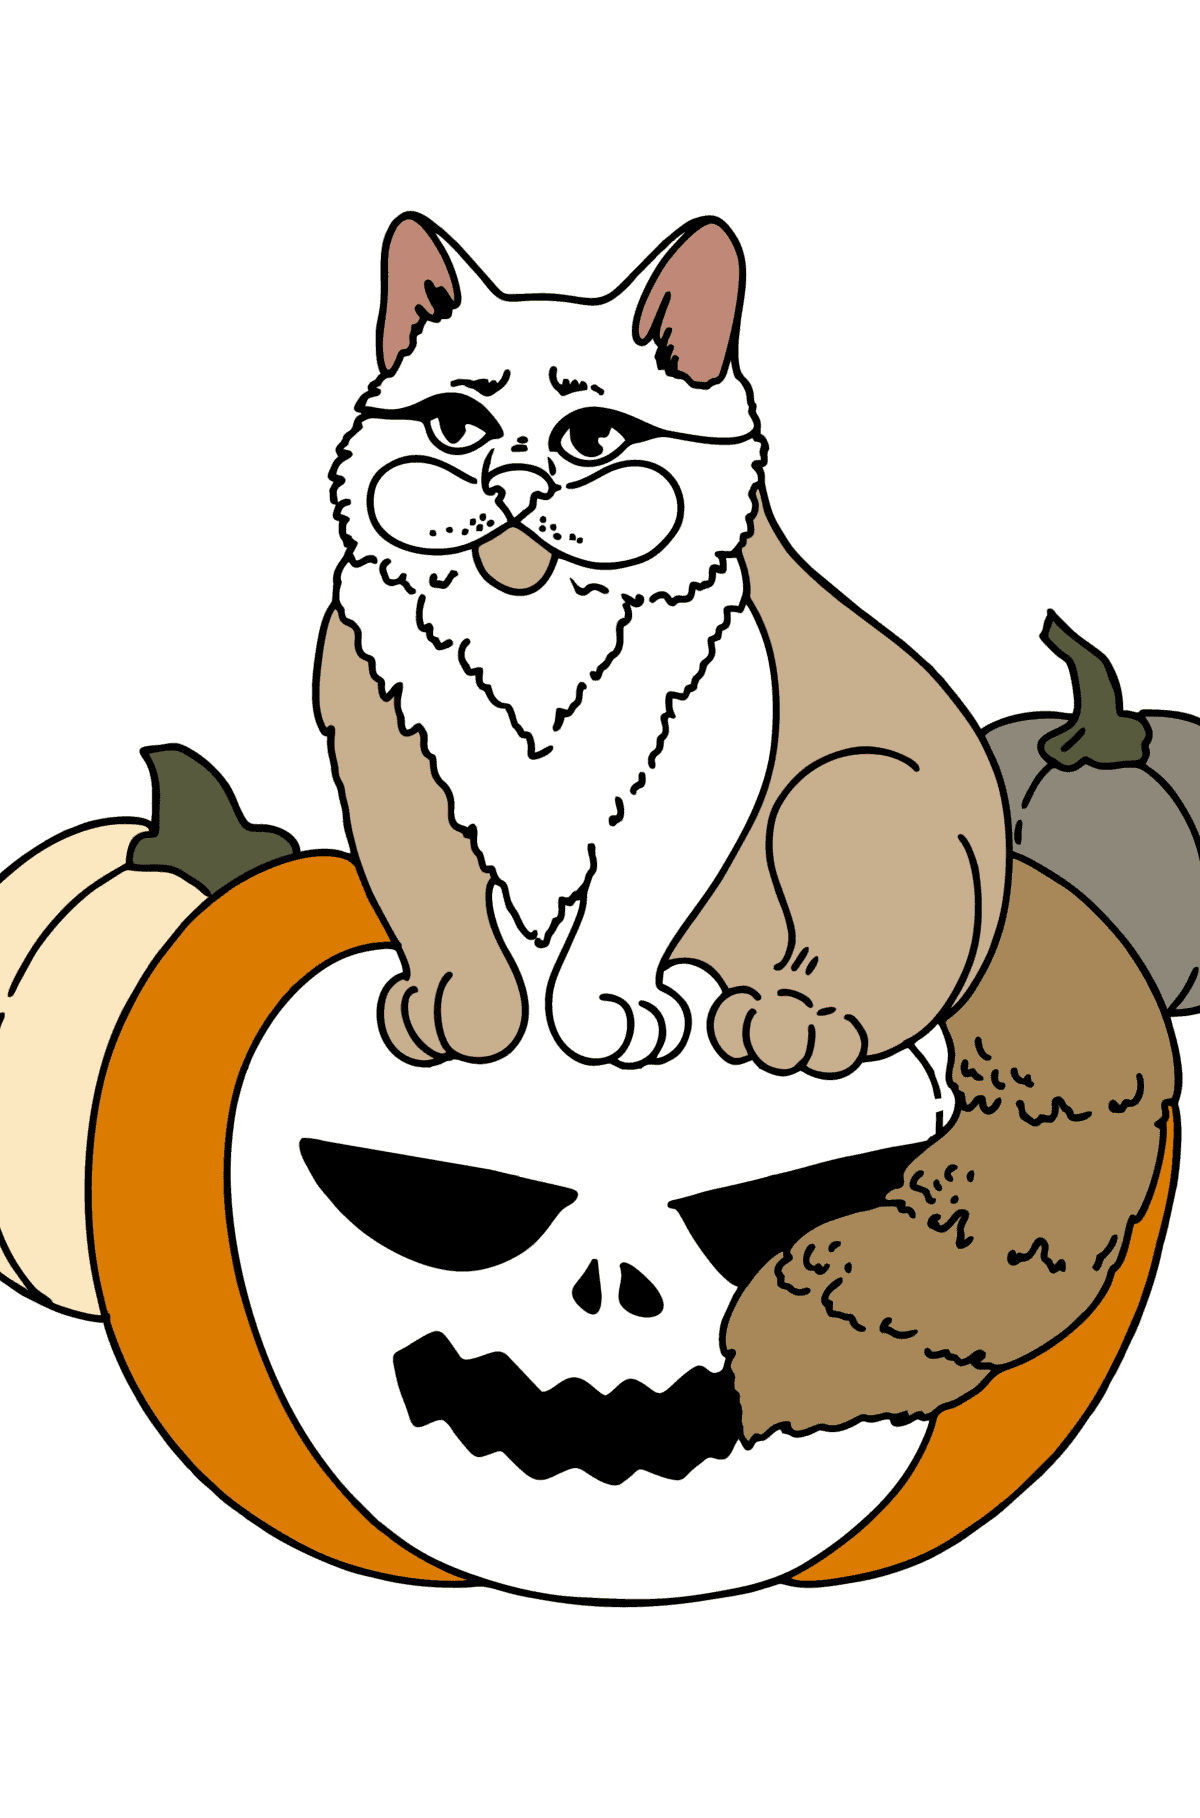 Halloween Cat coloring page - Coloring Pages for Kids